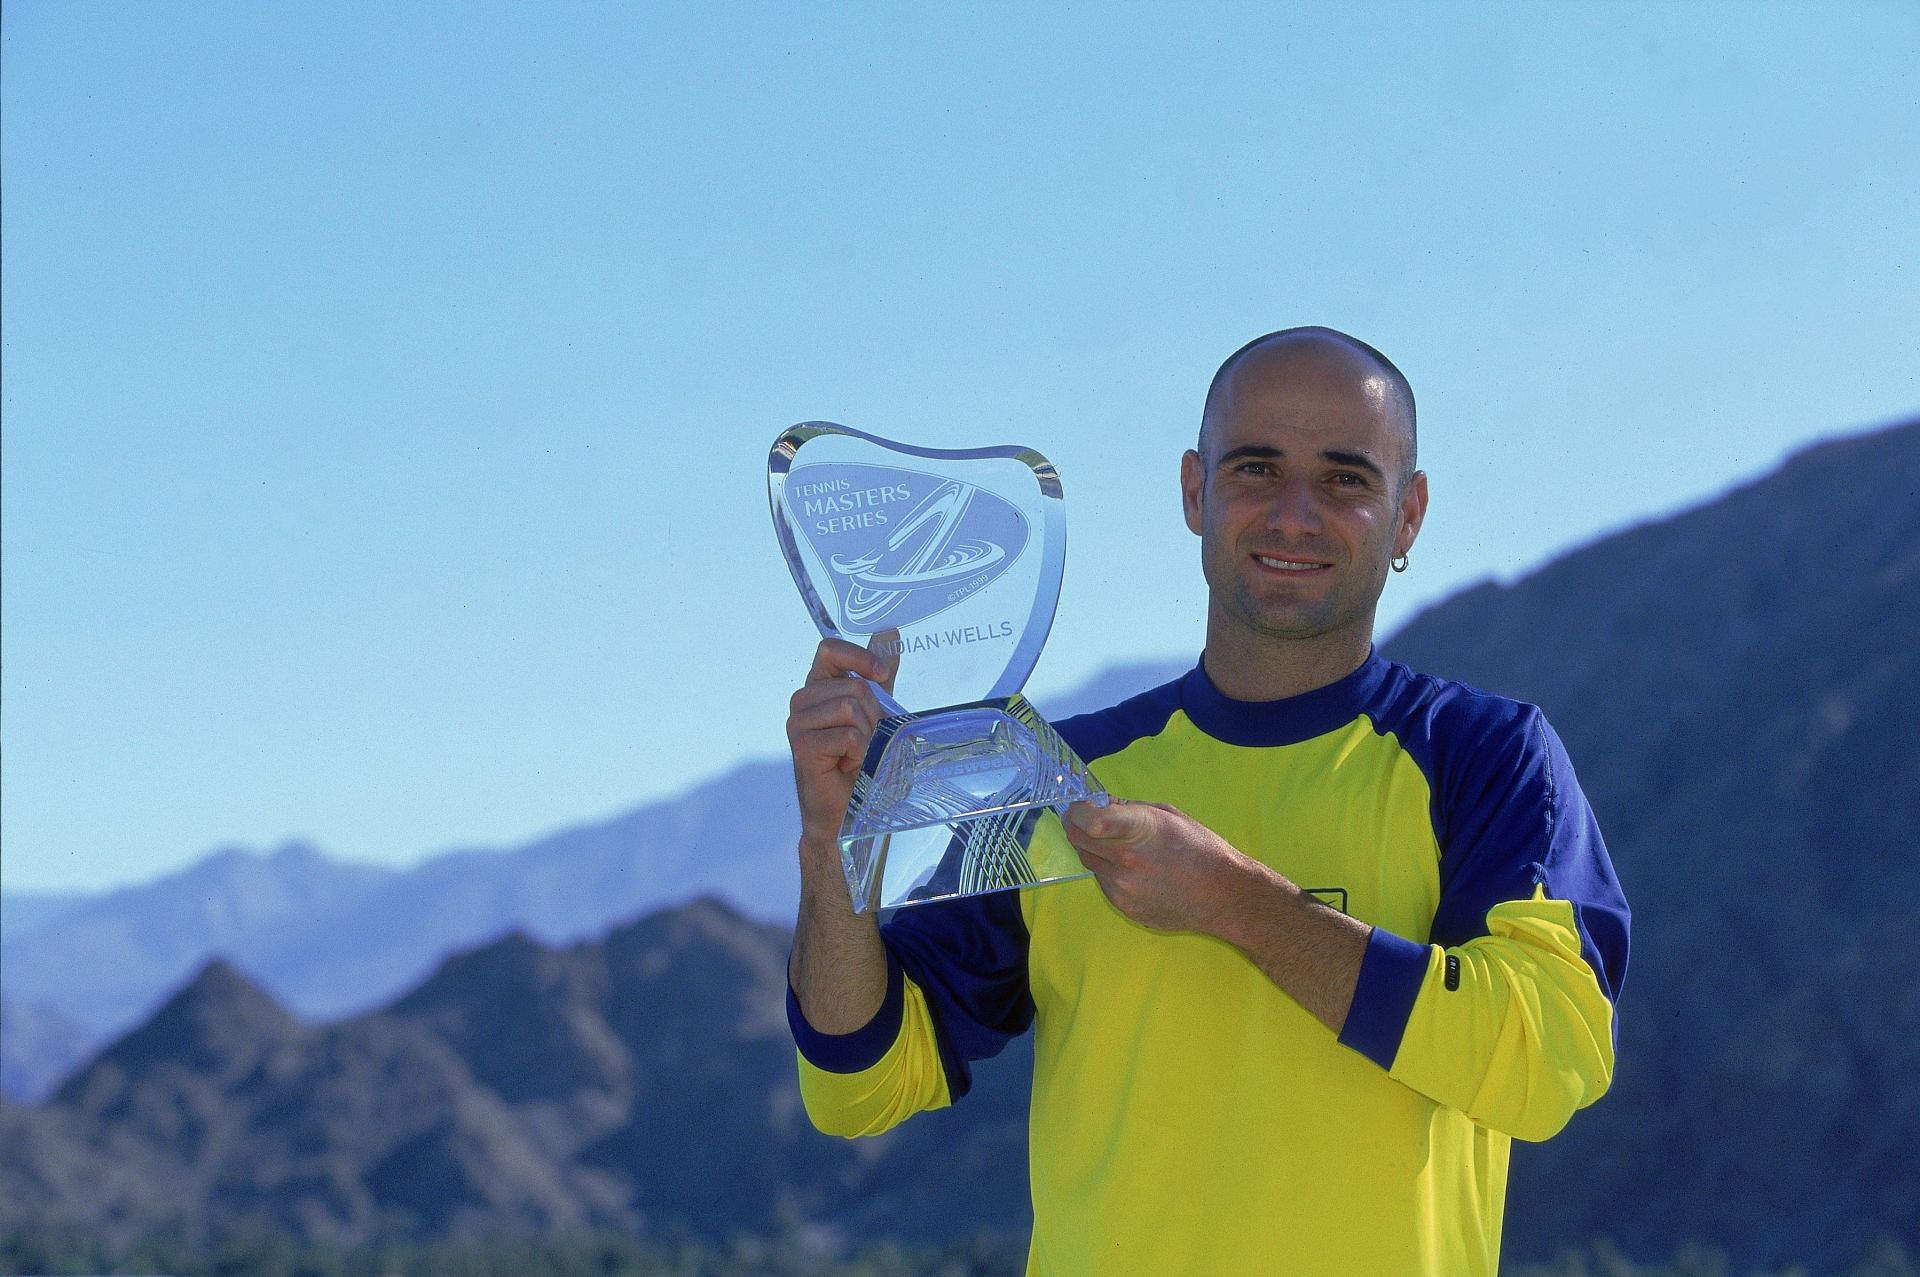 Andre Agassi completed the Sunshine Double in 2001